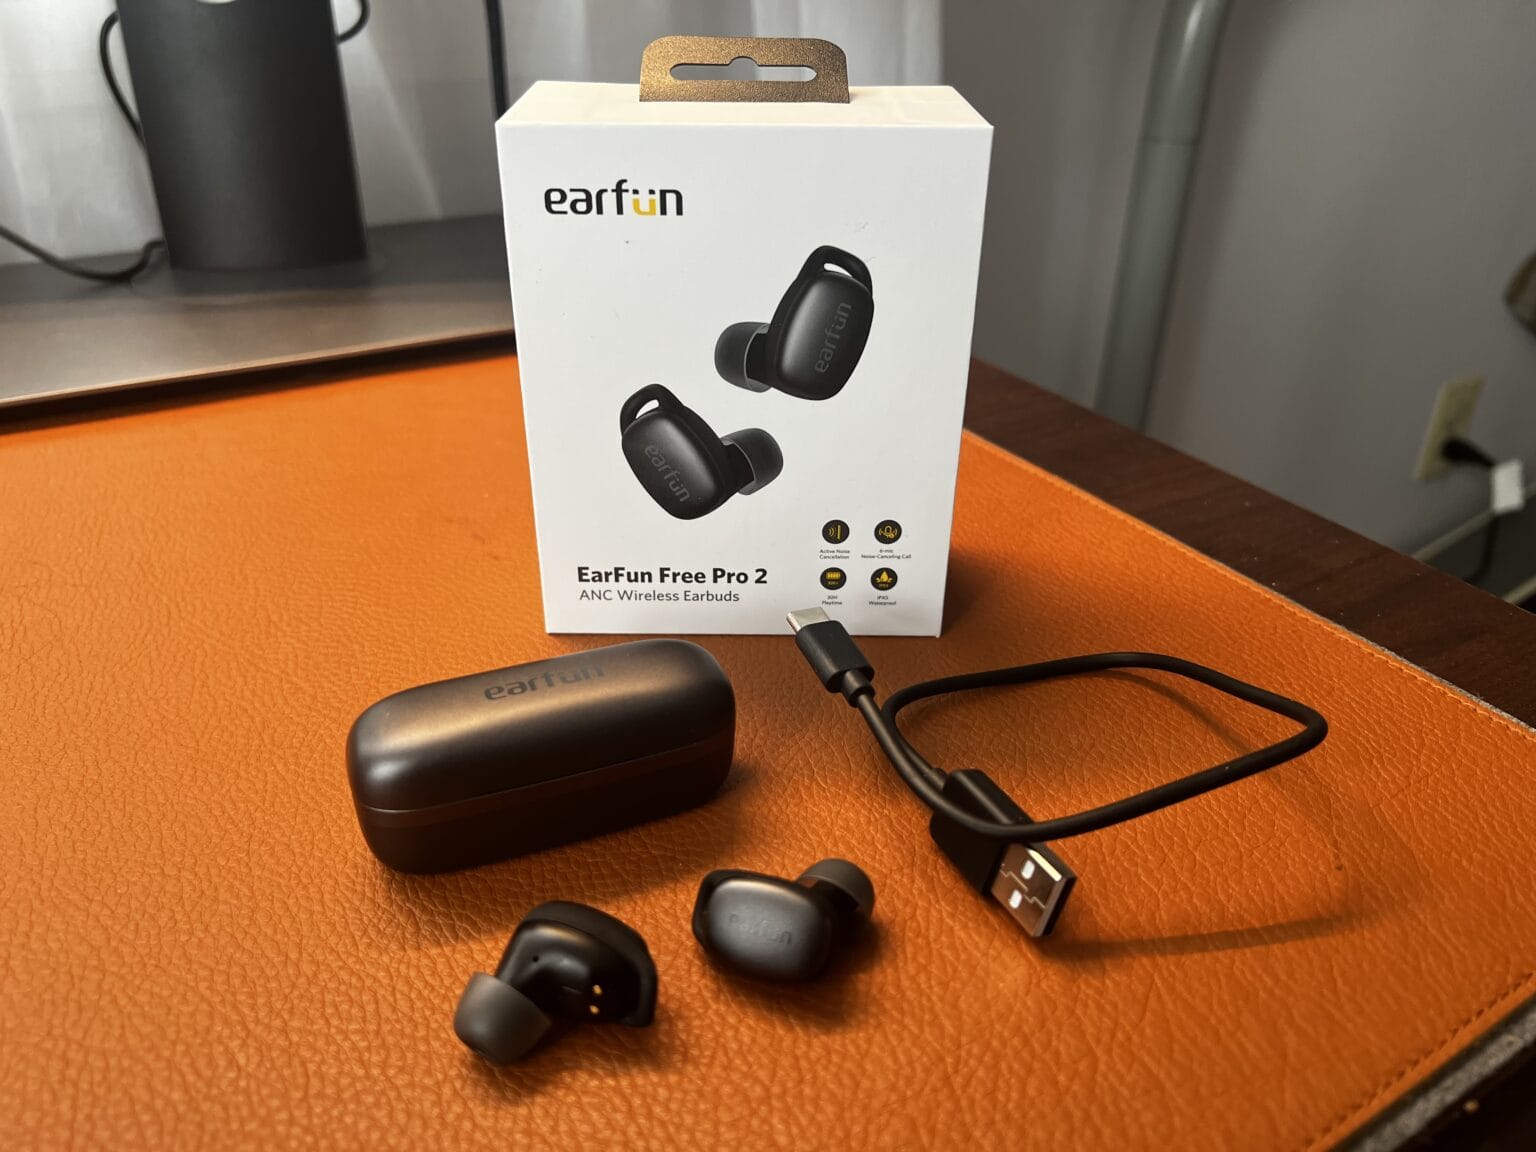 EarFun's Free Pro 2 wireless ANC earbuds offer a comfortable fit and good sound at an affordable price point.